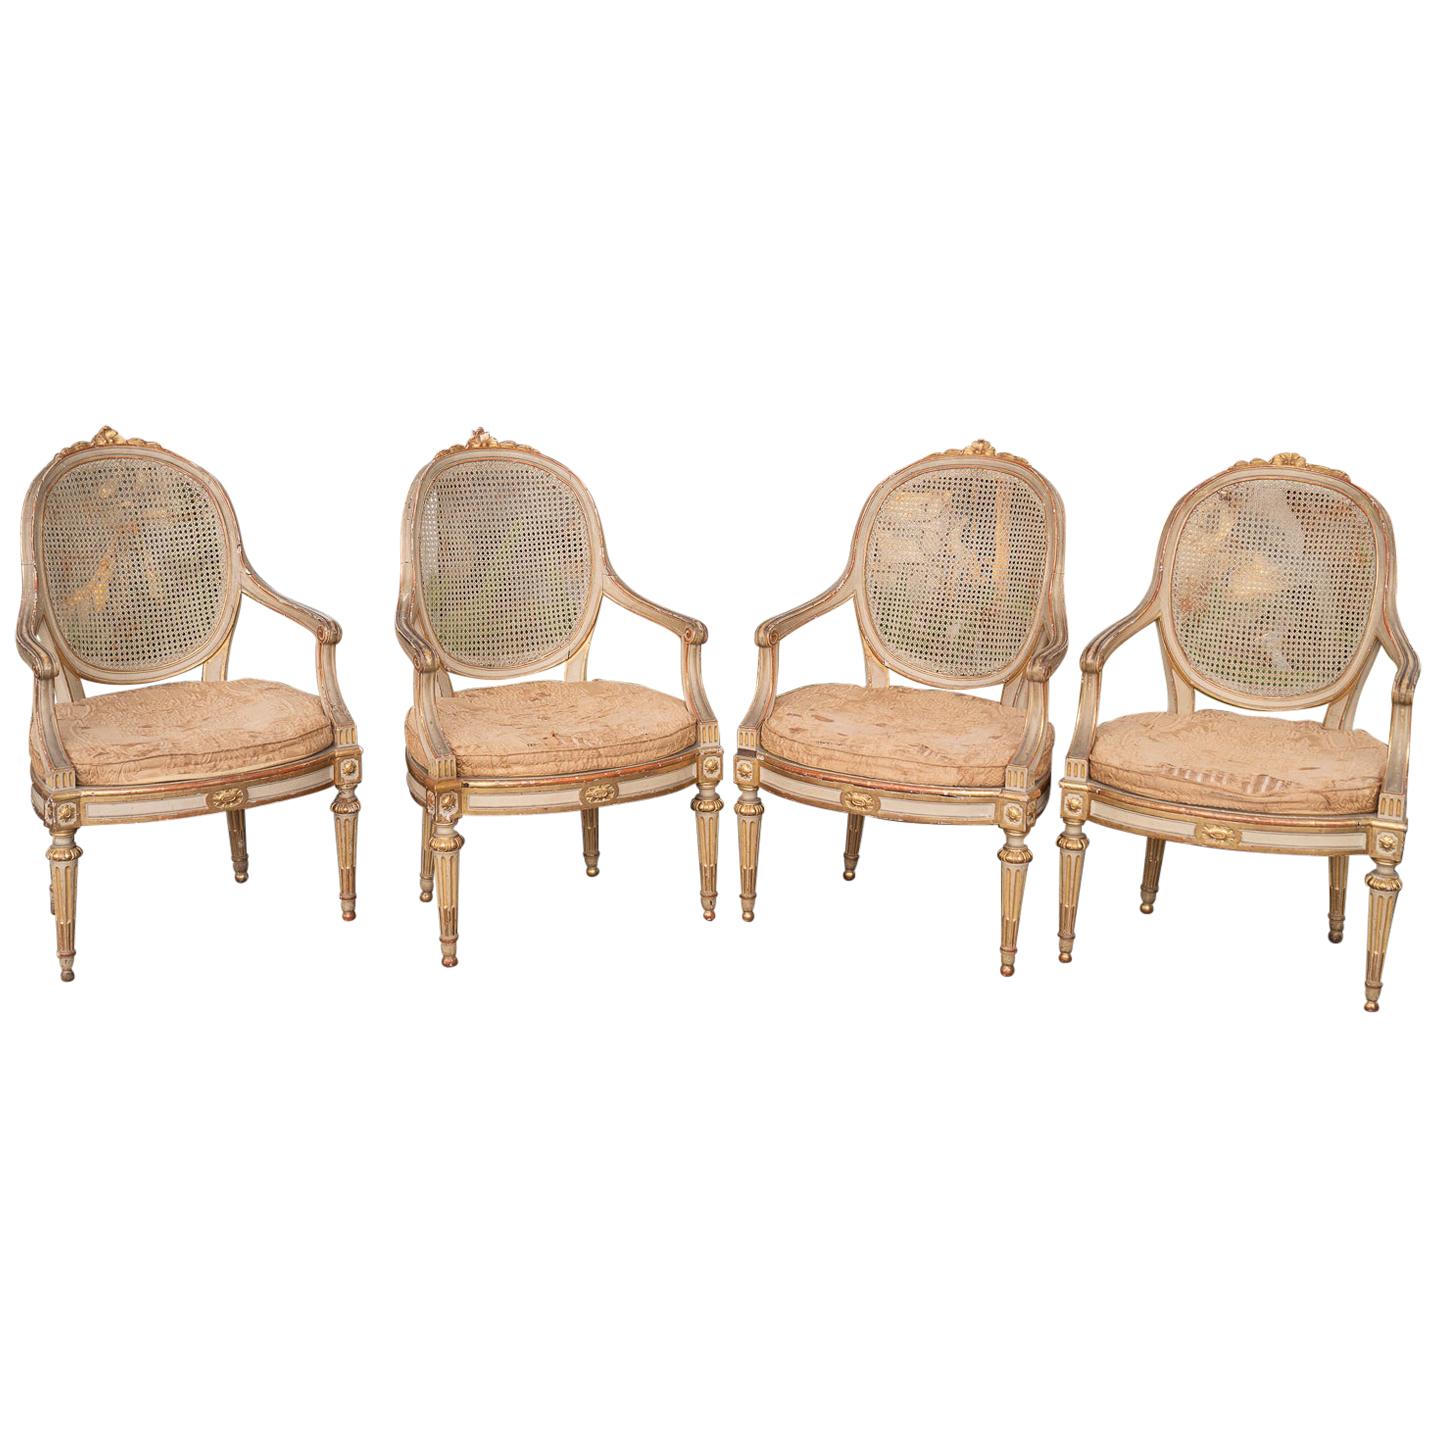 Two Pairs of 19th Century Gilded and Painted Armchairs  For Sale